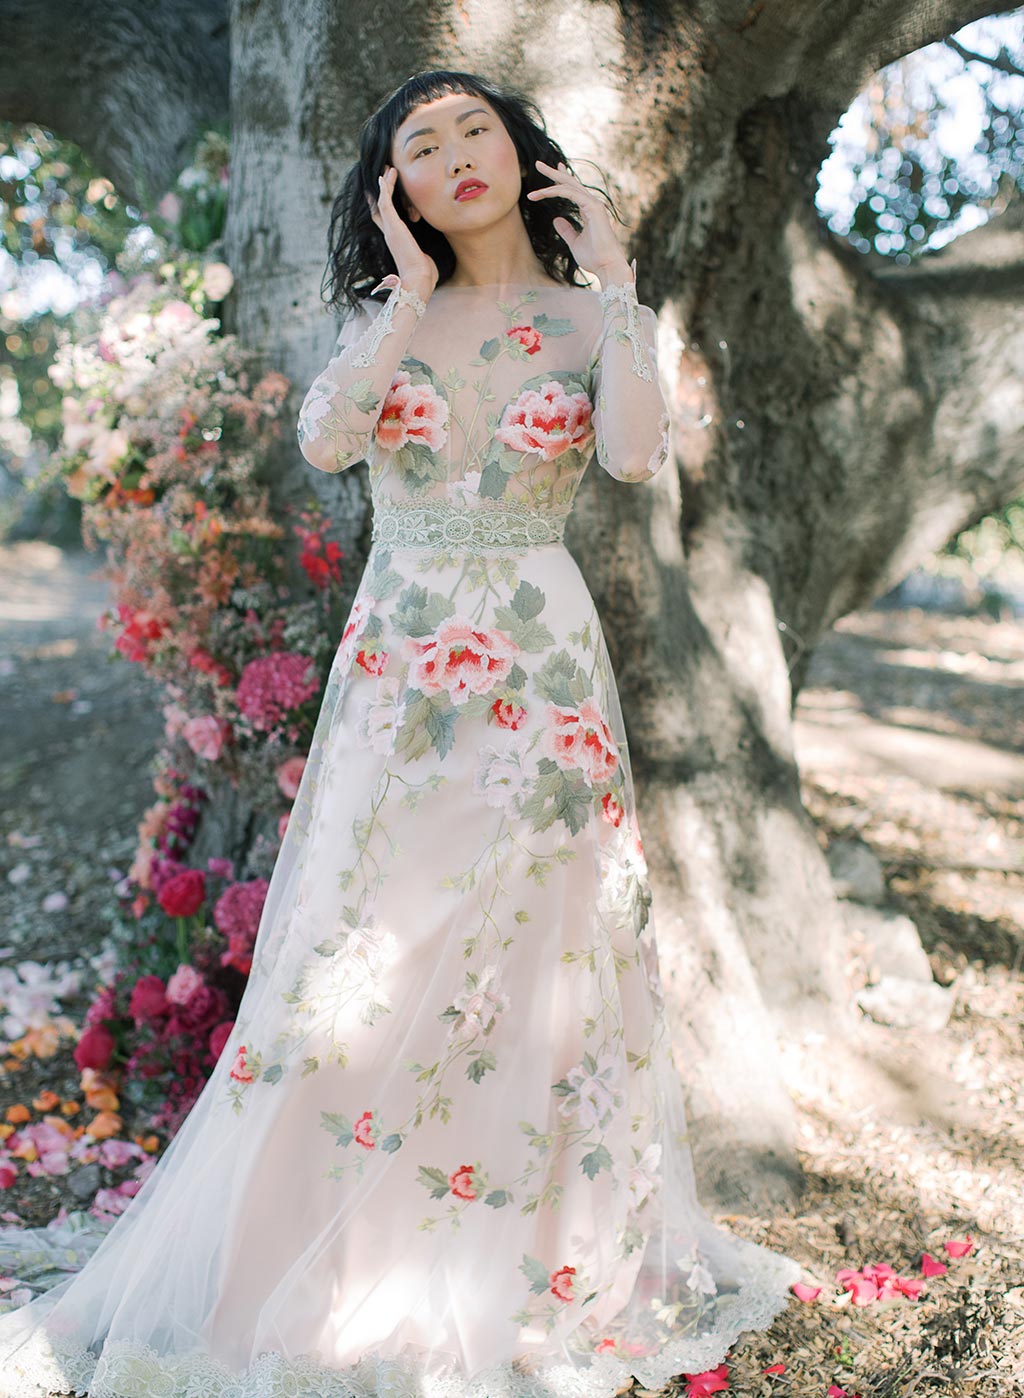 Flora Roses embroidered wedding dress by Claire Pettibone